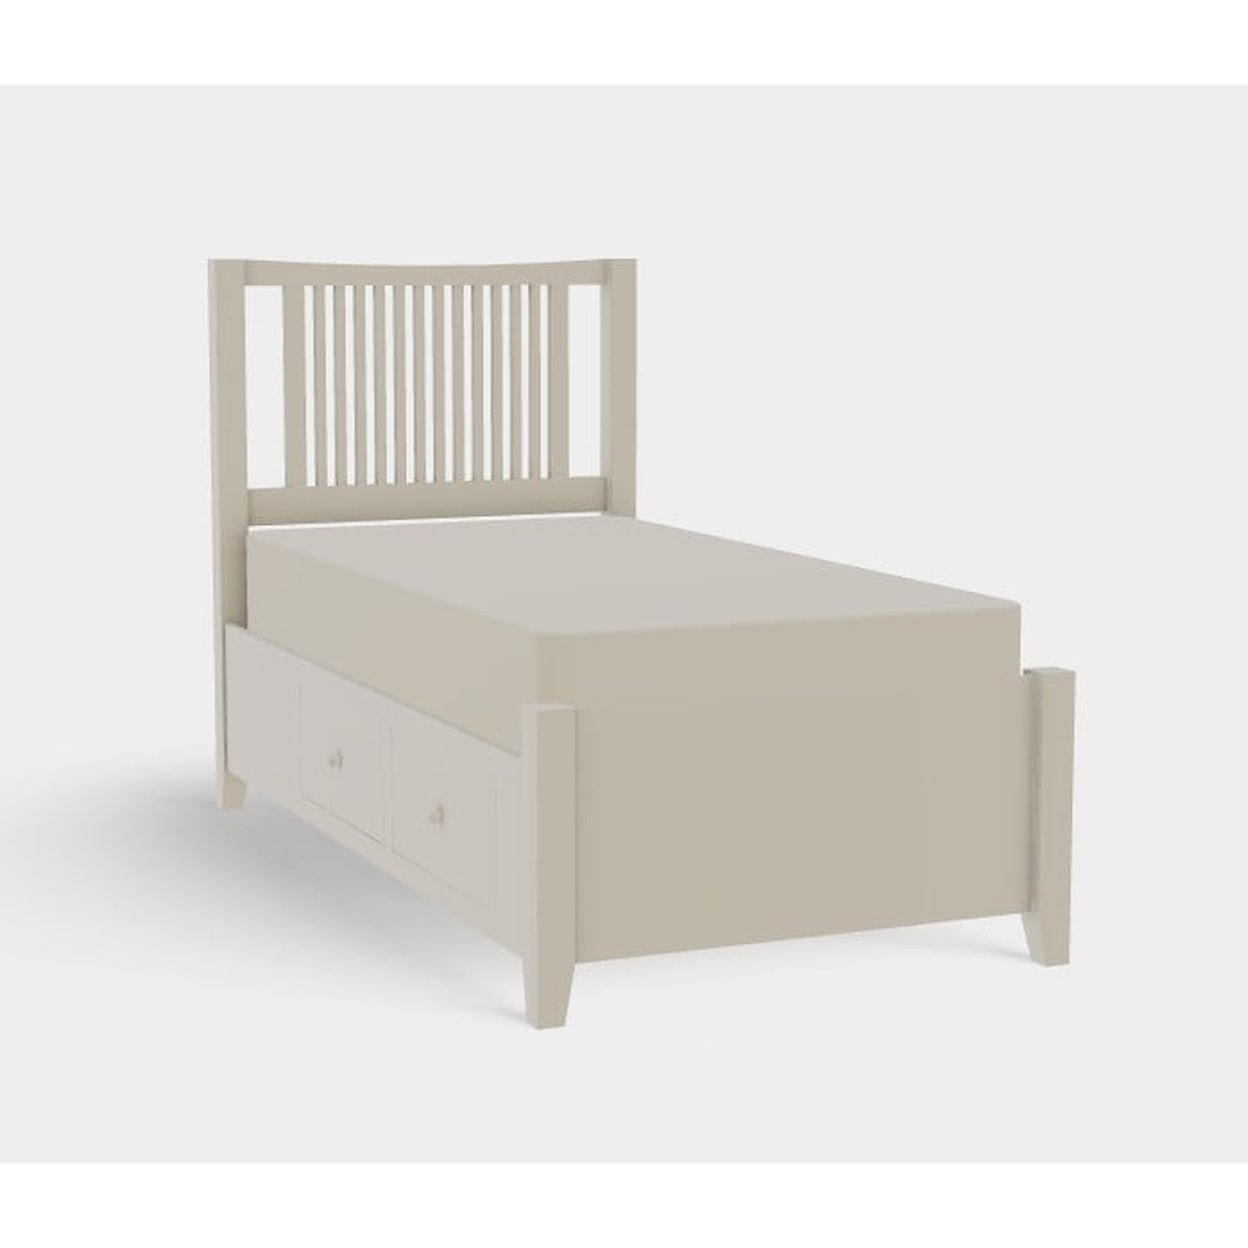 Mavin Atwood Group Atwood Twin XL Left Drawerside Spindle Bed